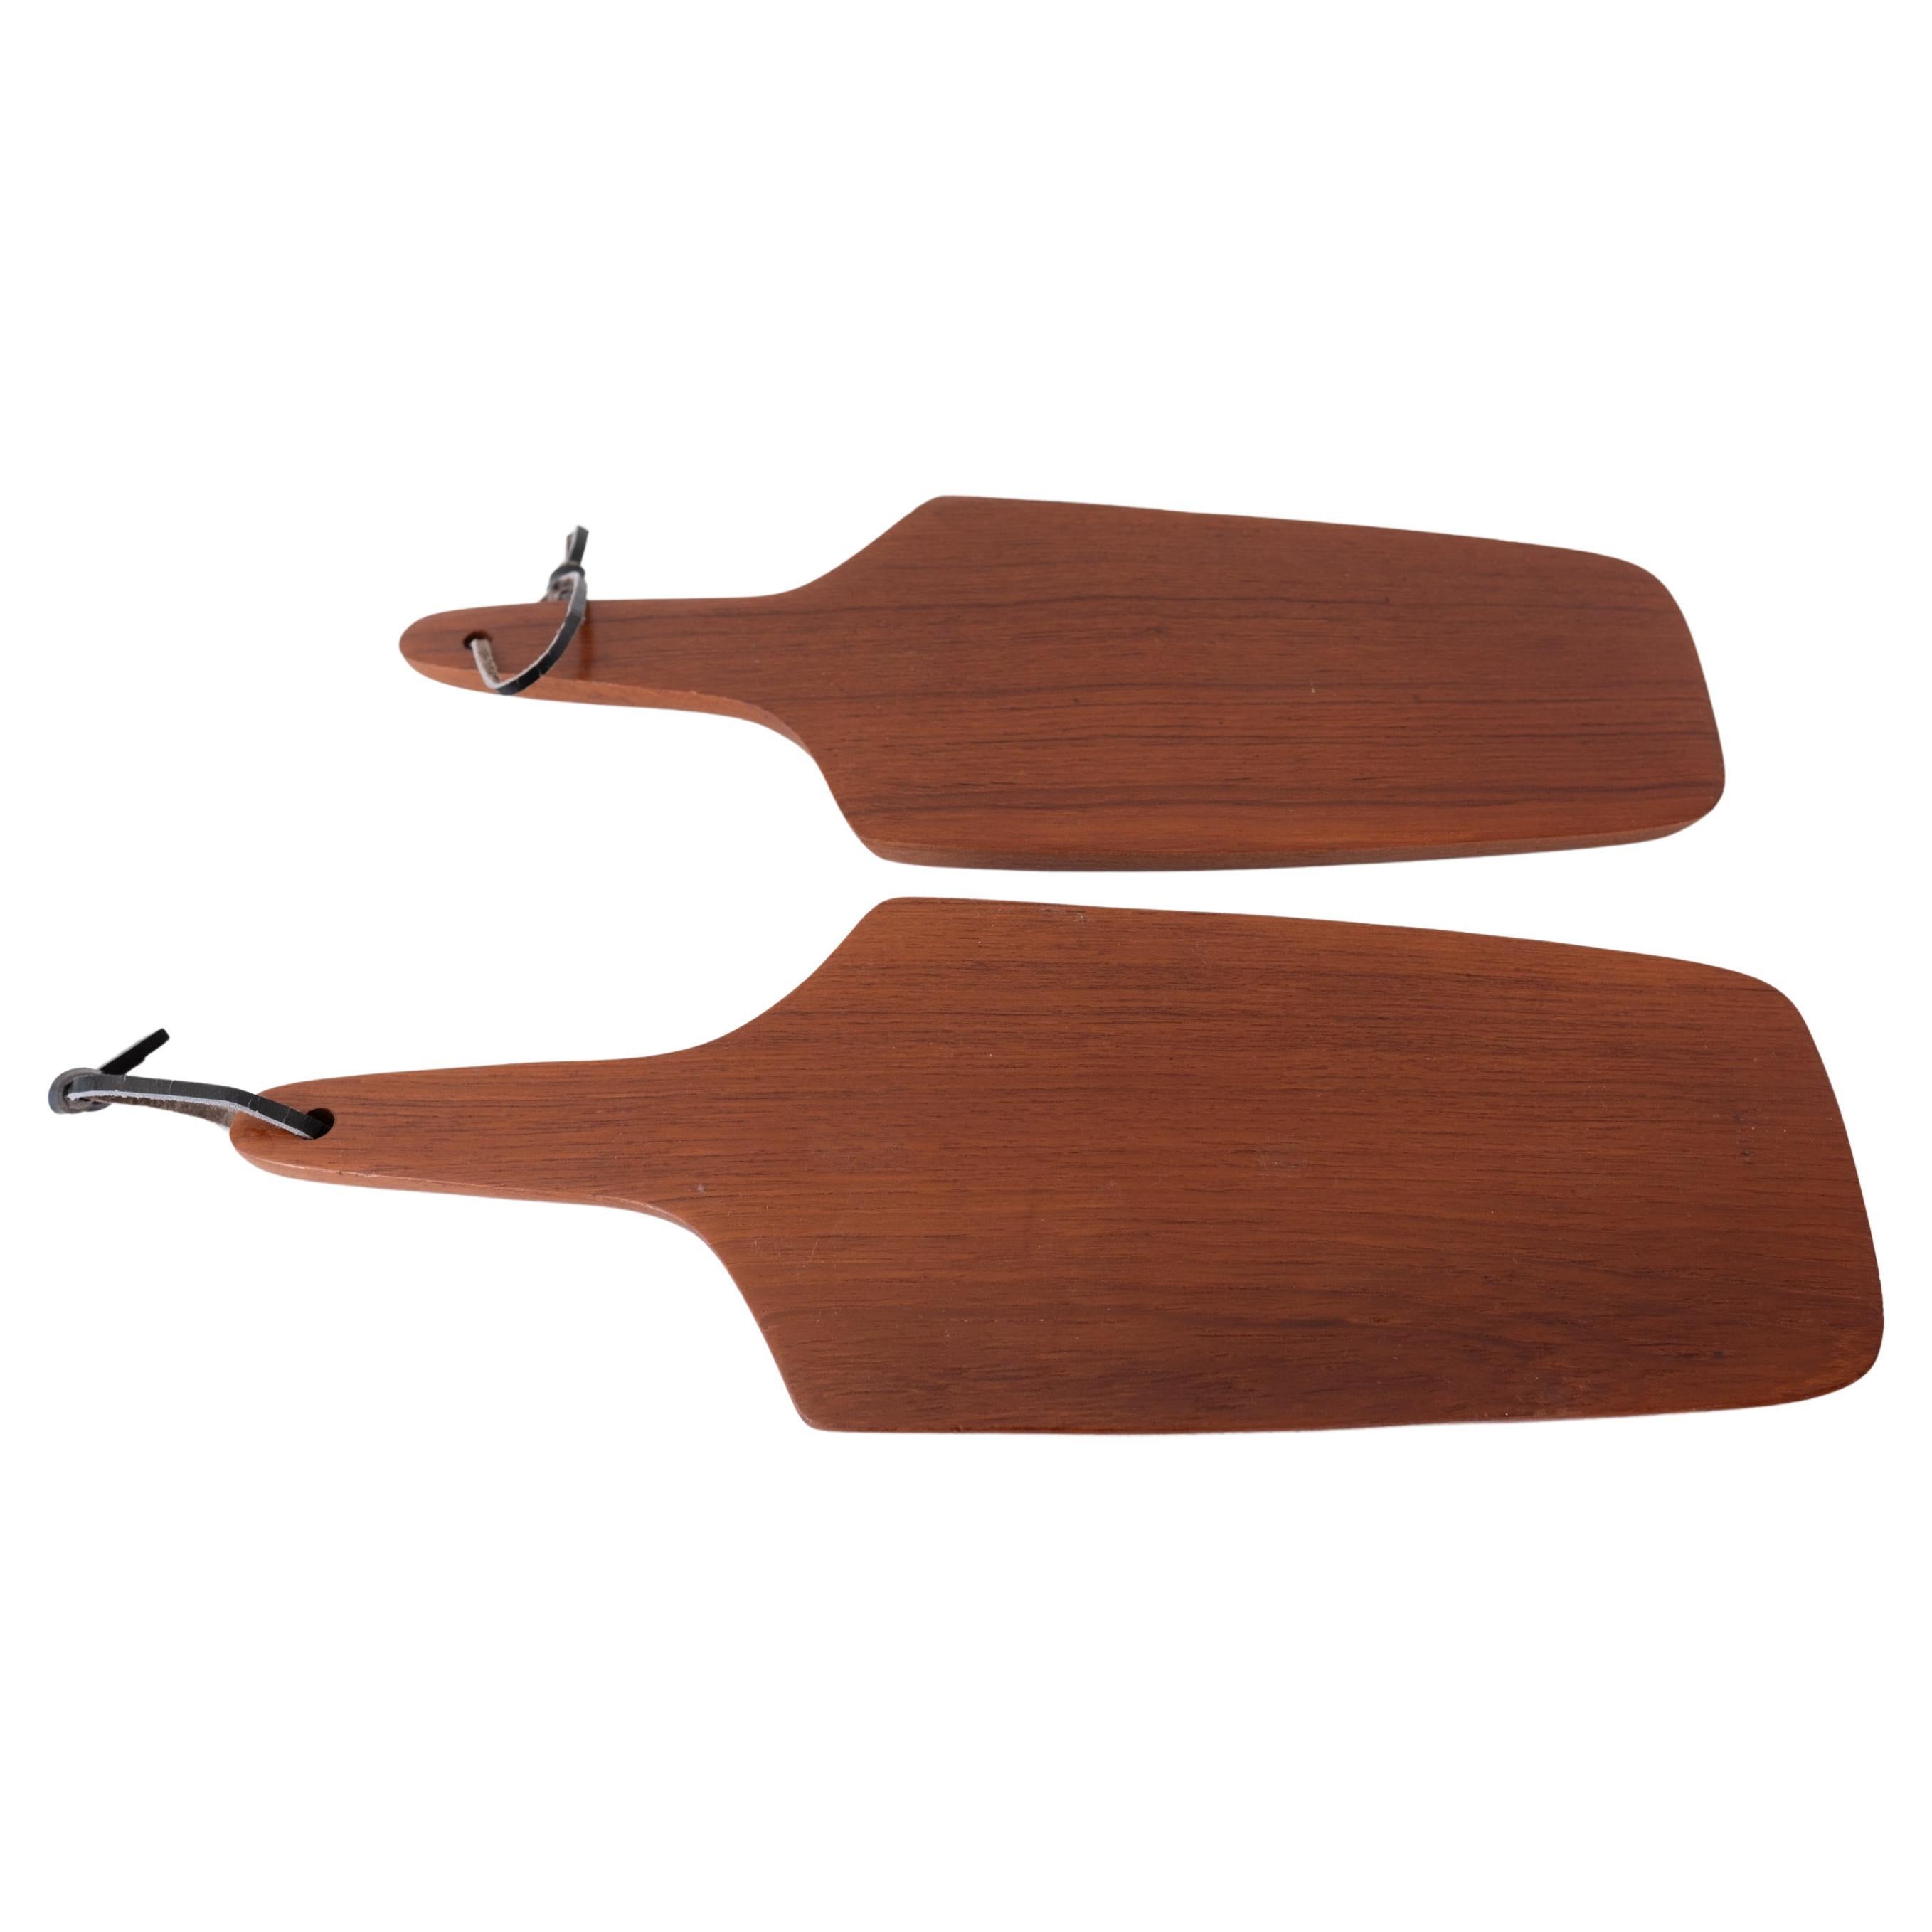 Pair of Cutting or Charcuterie Boards in Teak